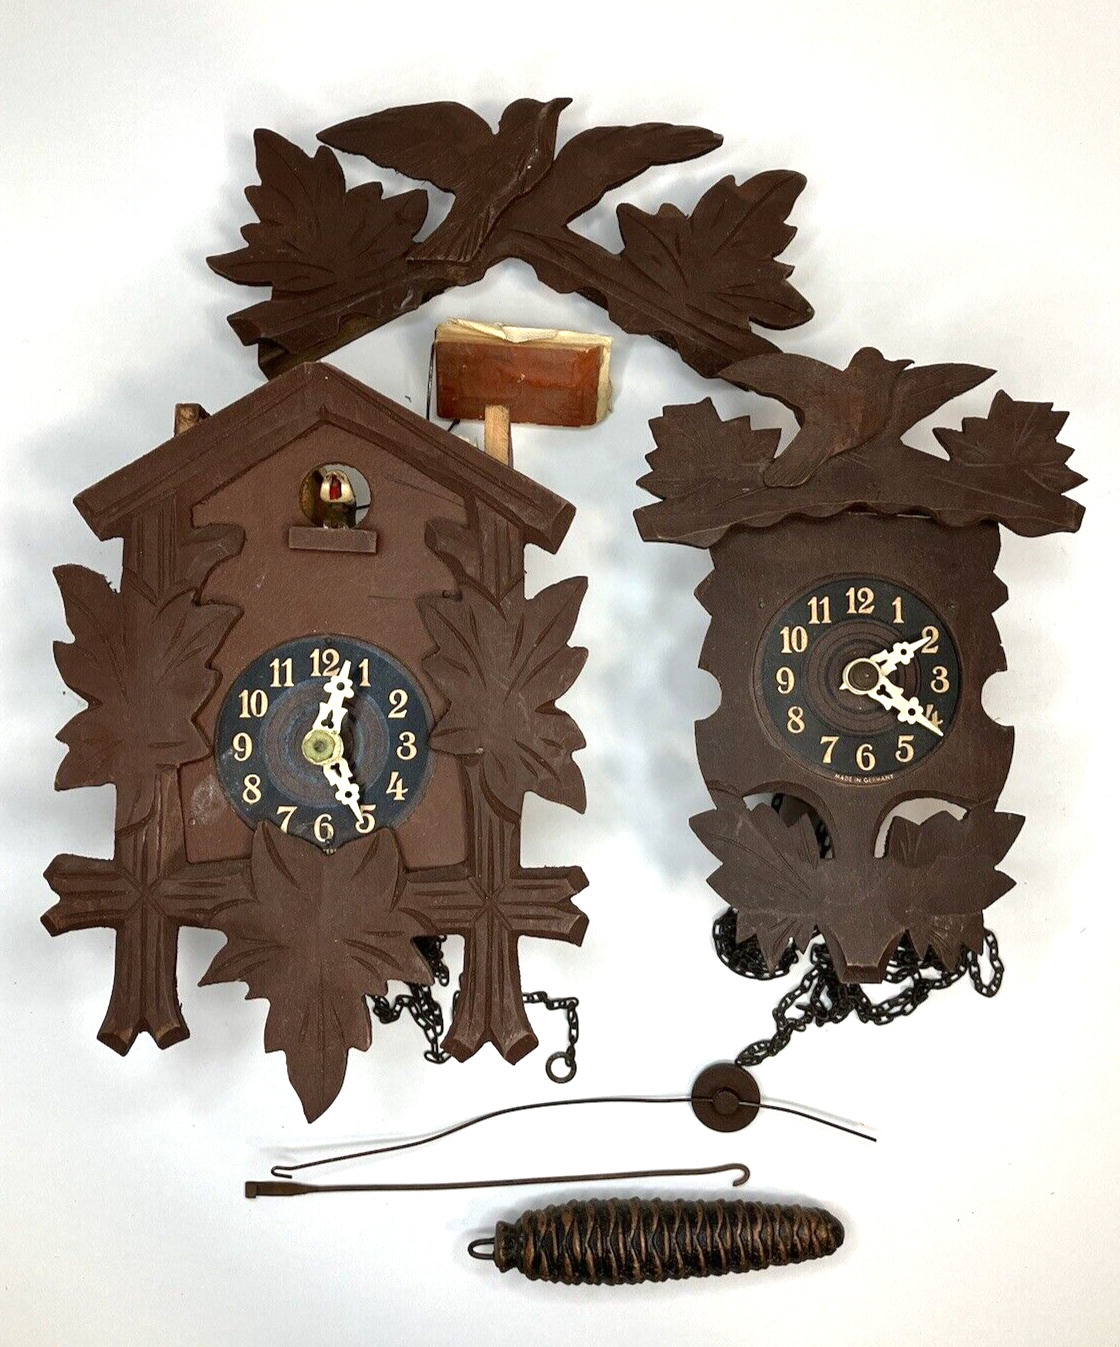 2 Vtg Small Cuckoo Clocks Made in Germany AS-IS FOR PARTS OR REPAIR